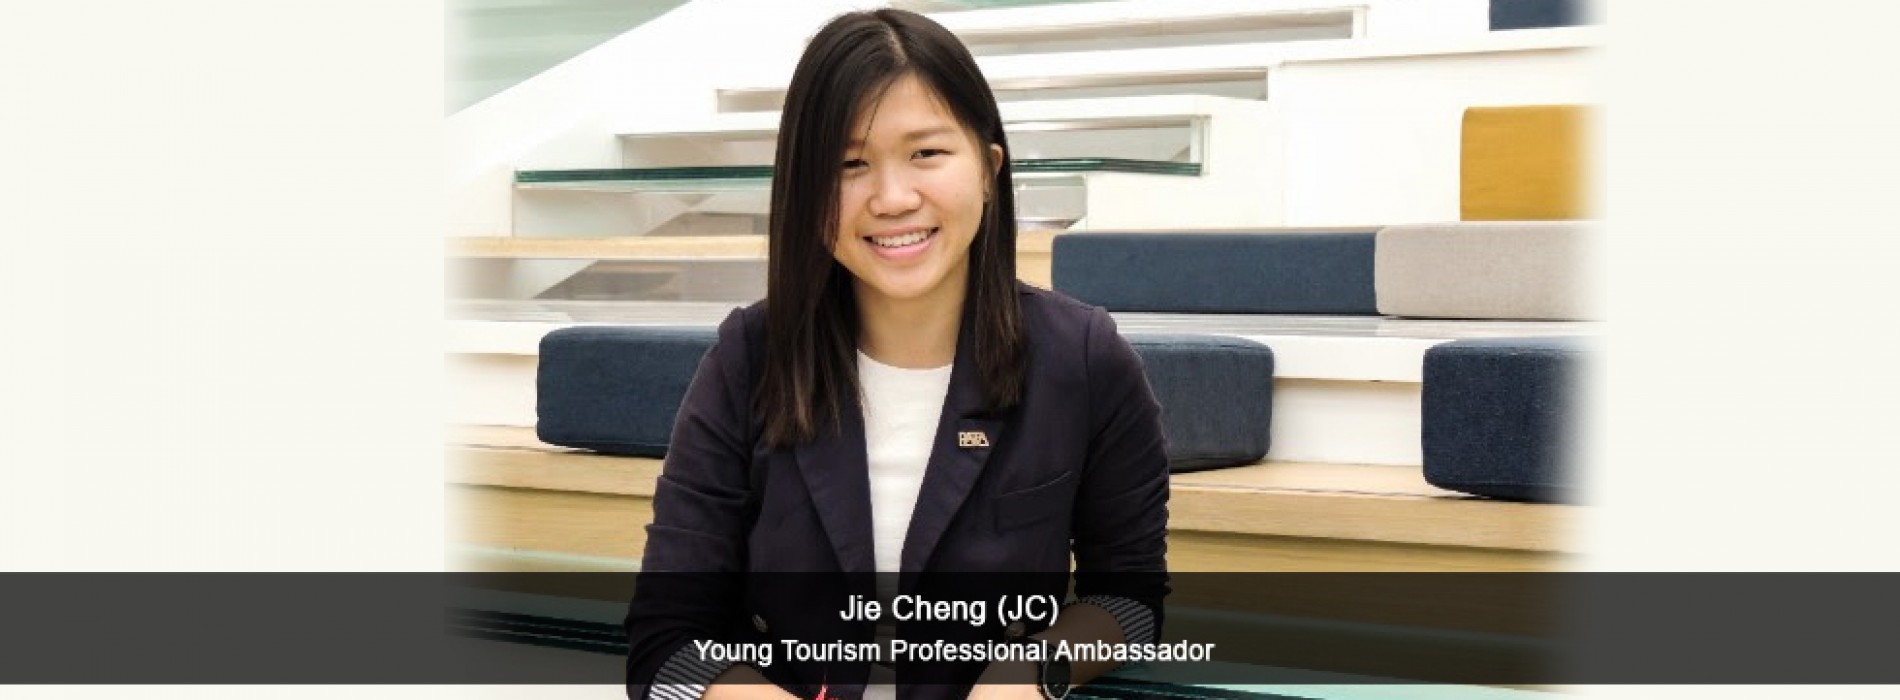 PATA appoints Young Tourism Professional Ambassador